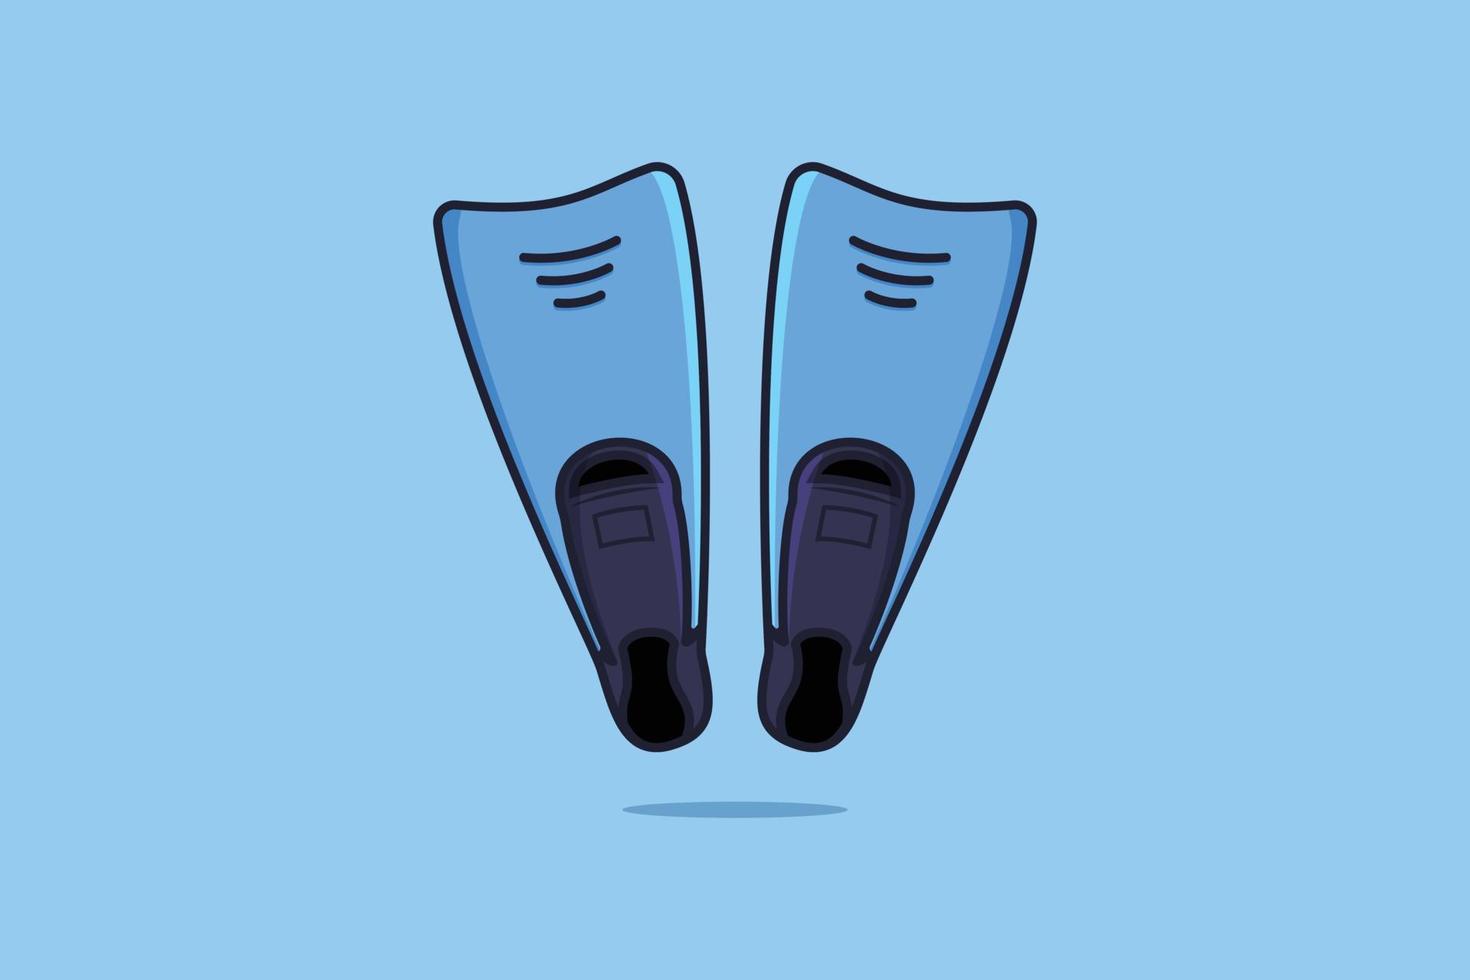 Diving Flippers vector icon illustration. Swimming objects icon design concept. Men swimming shoes, Swimming equipment, Fast swim, Footwear object, Fins for diving, Diving flippers.